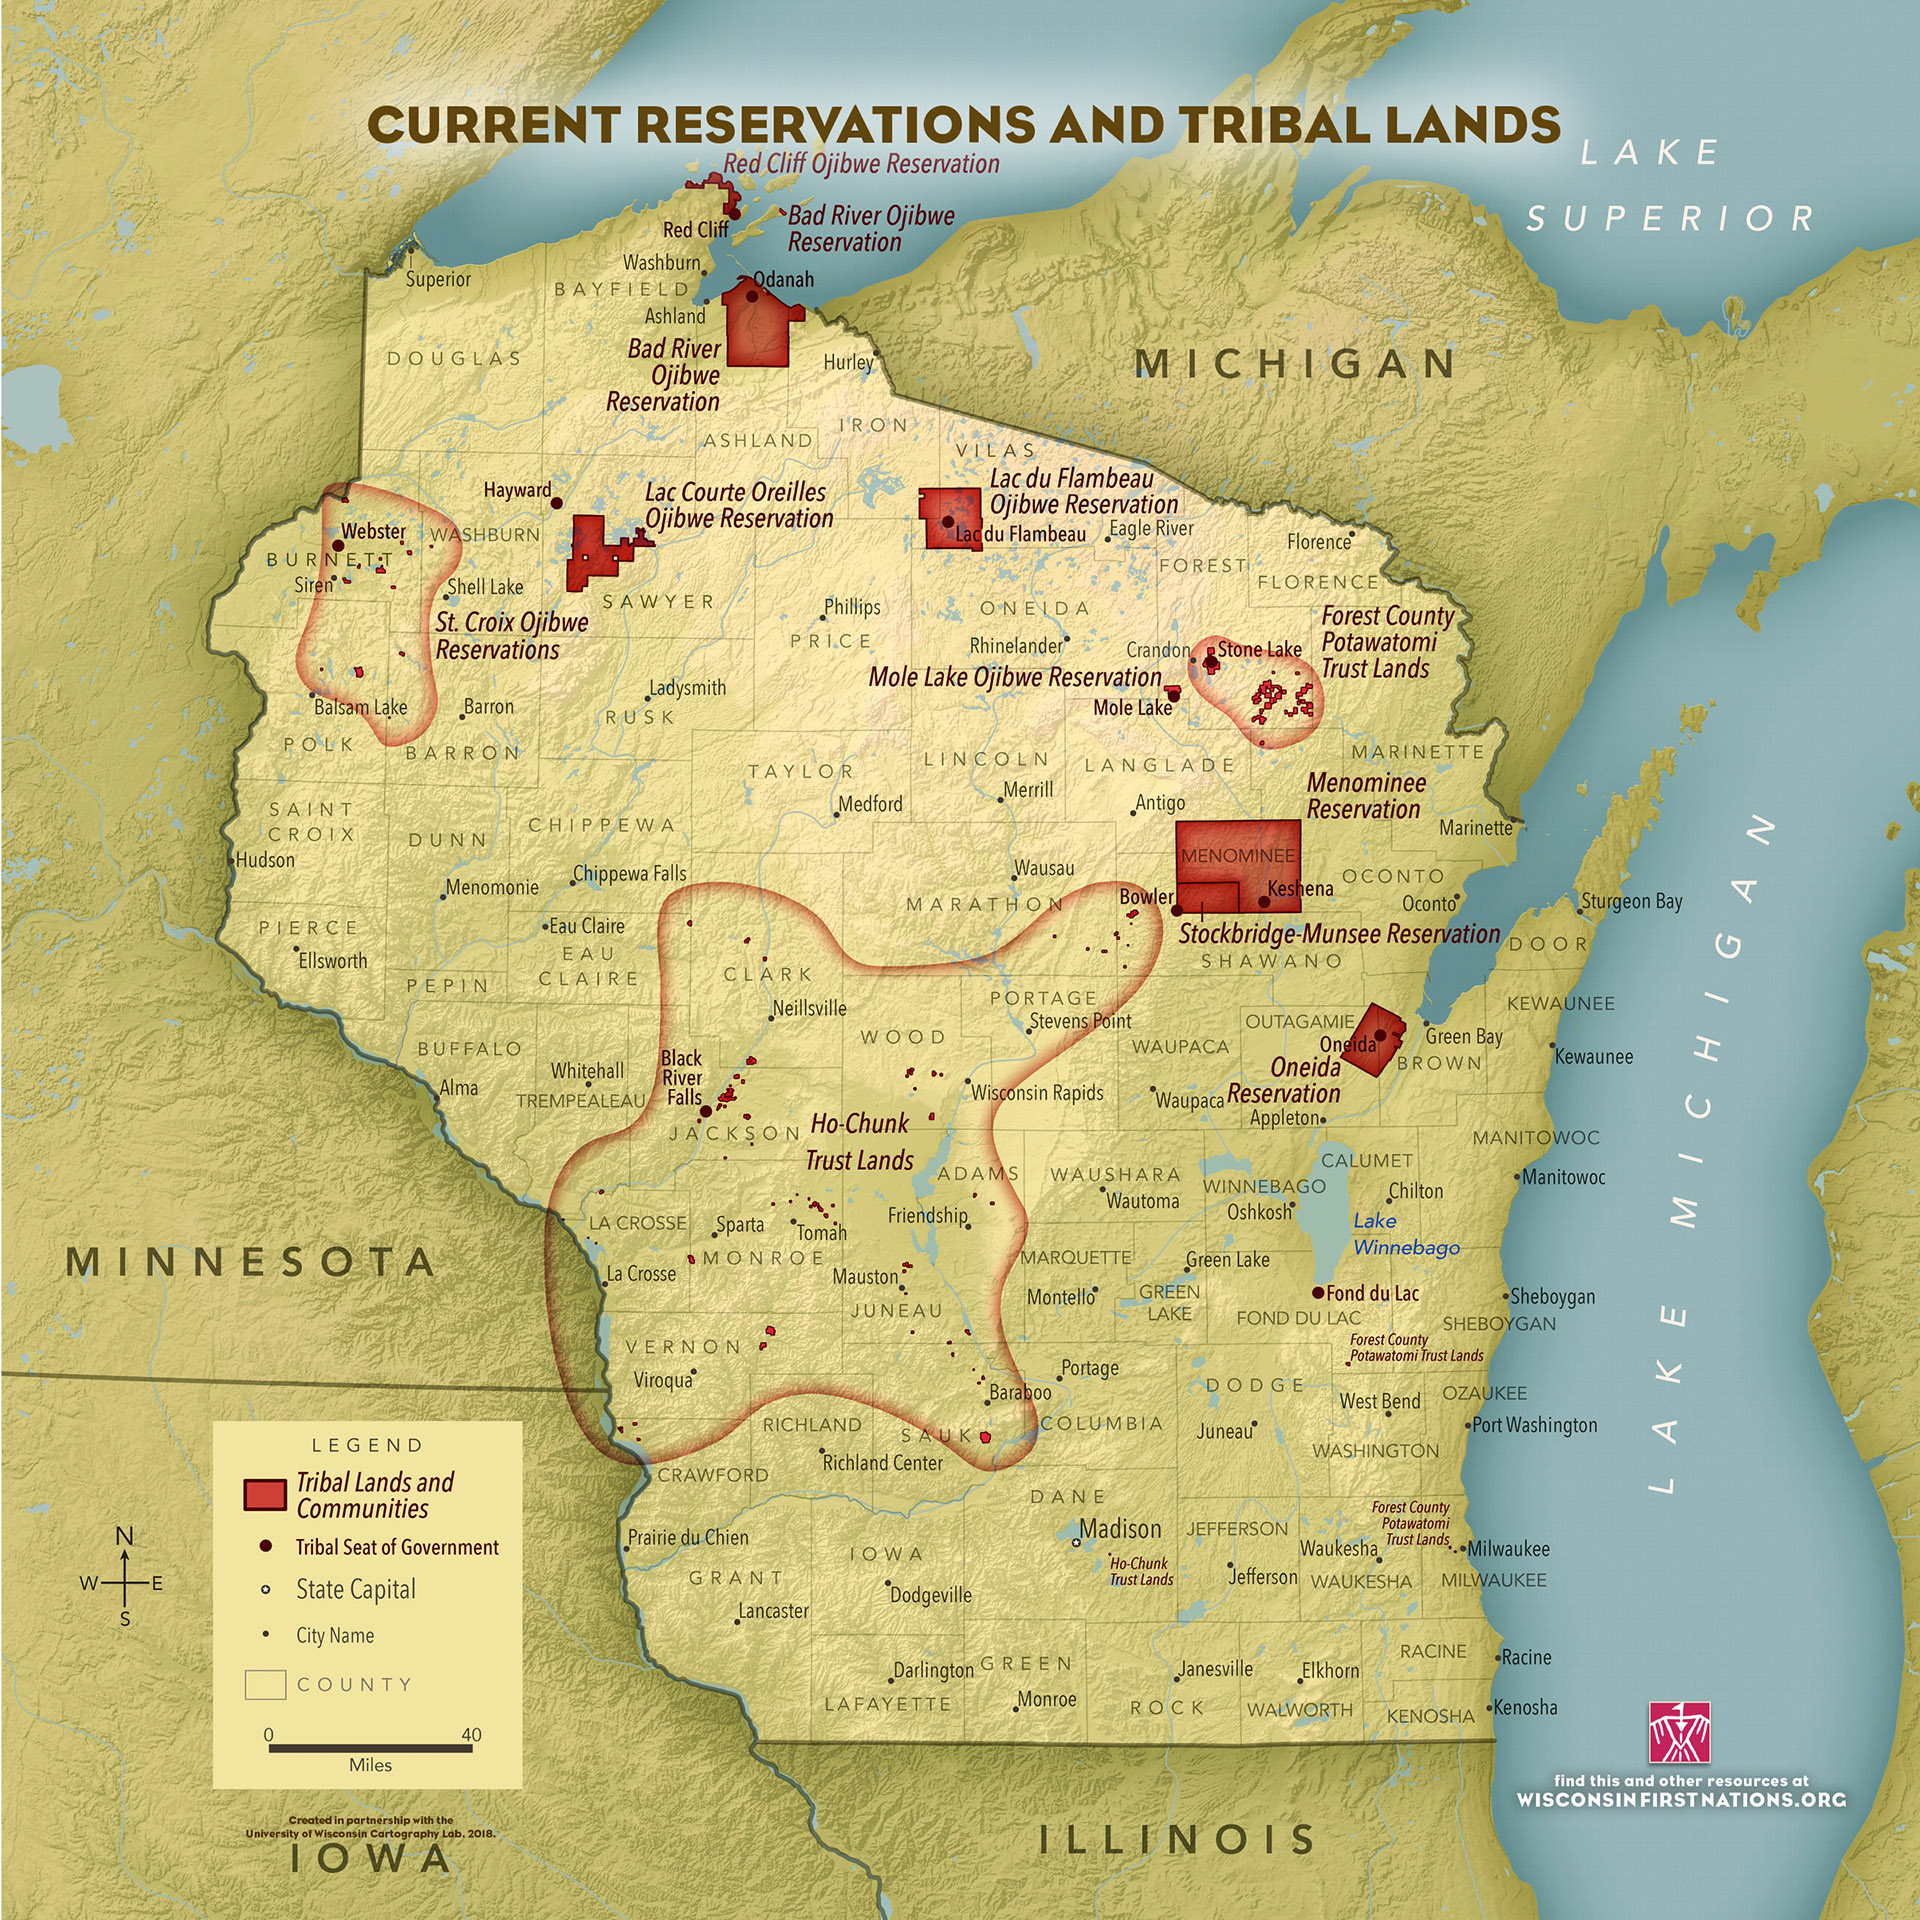 A map with the title "Current Reservations and Tribal Lands" shows the location of tribal lands or communities in Wisconsin.